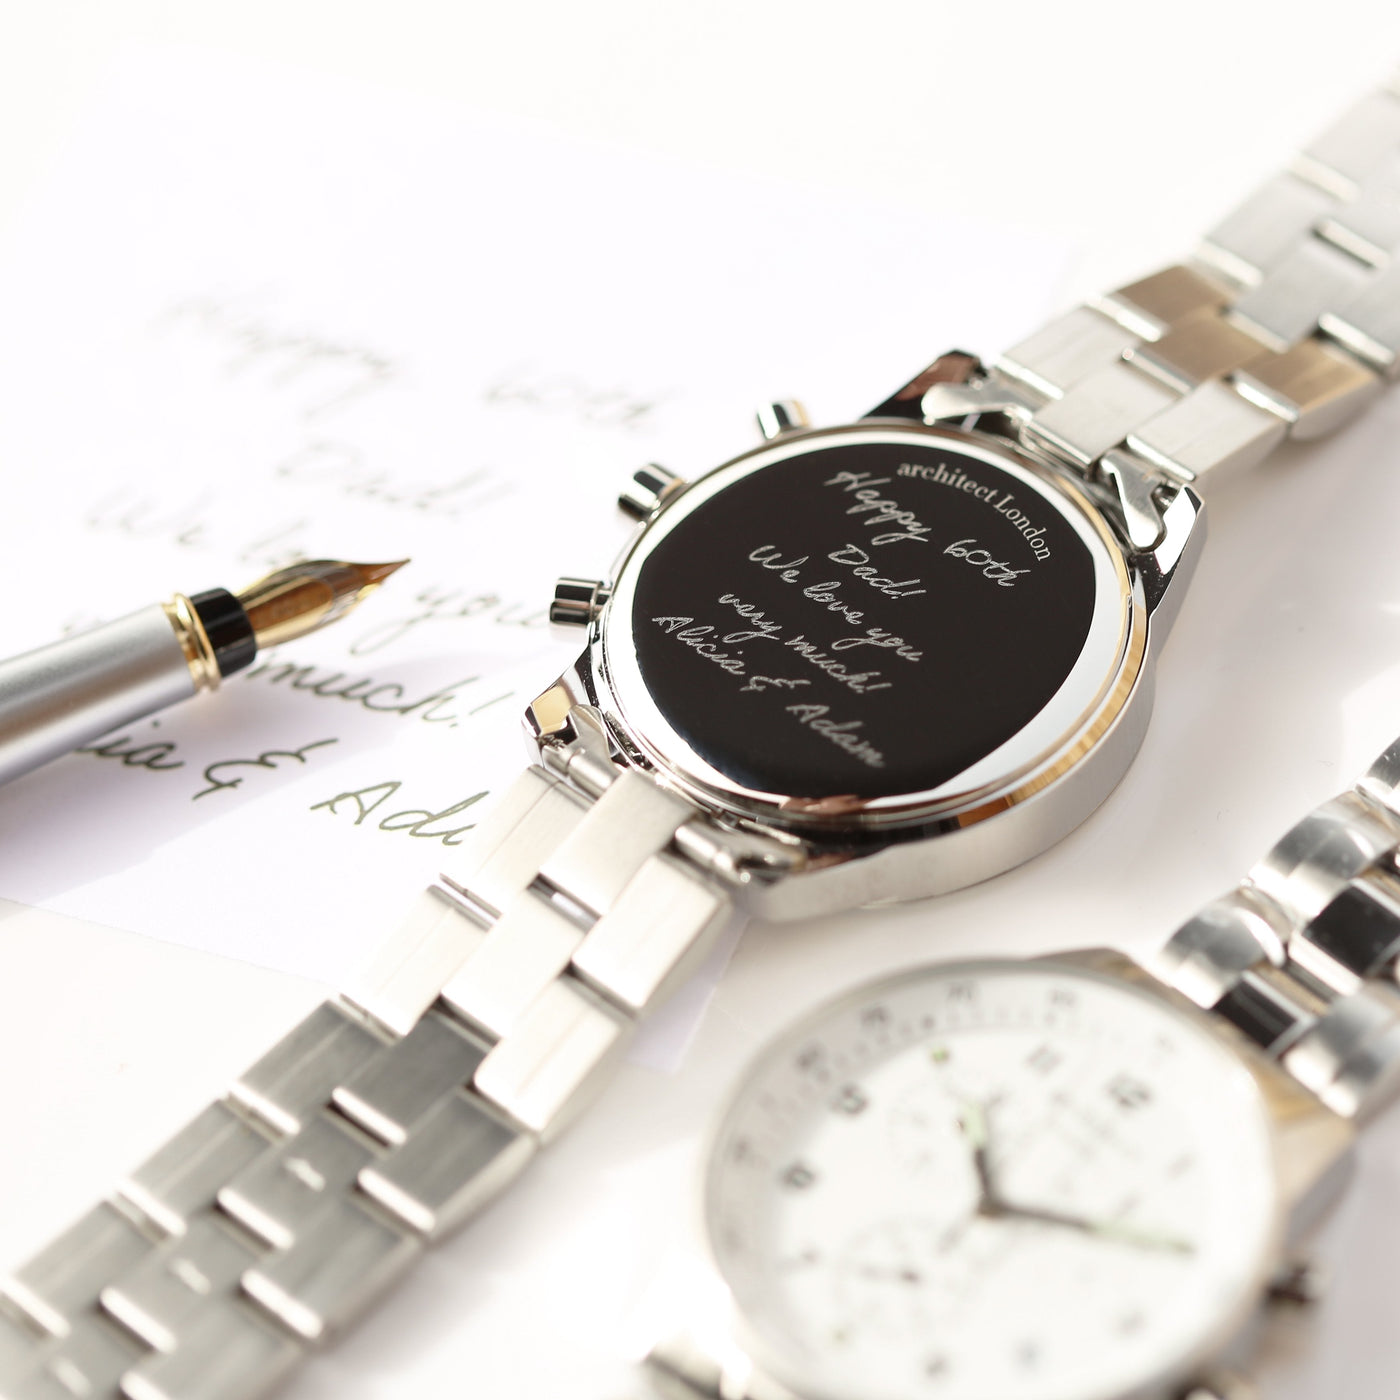 Swiss Made Mens Architect Watch Endeavour - Handwriting Engraving